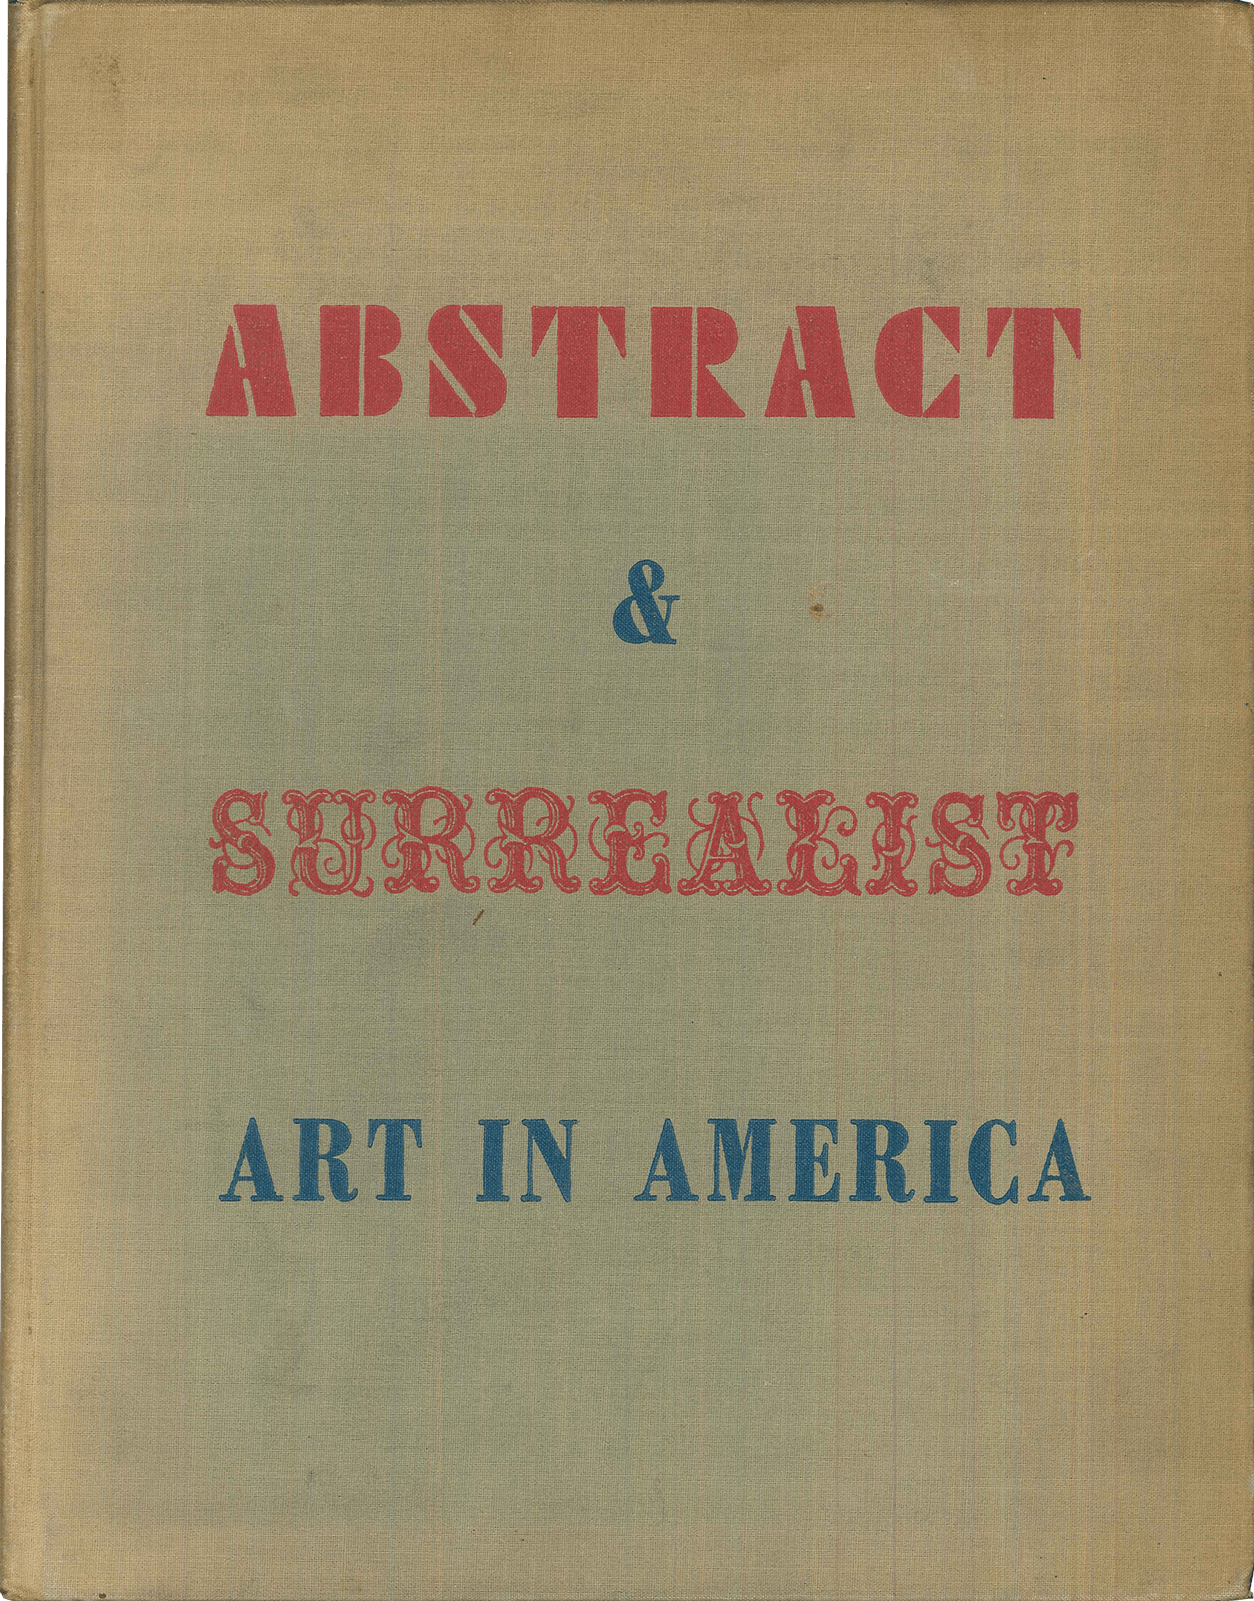 Abstract & Surrealist Art in America, 1944